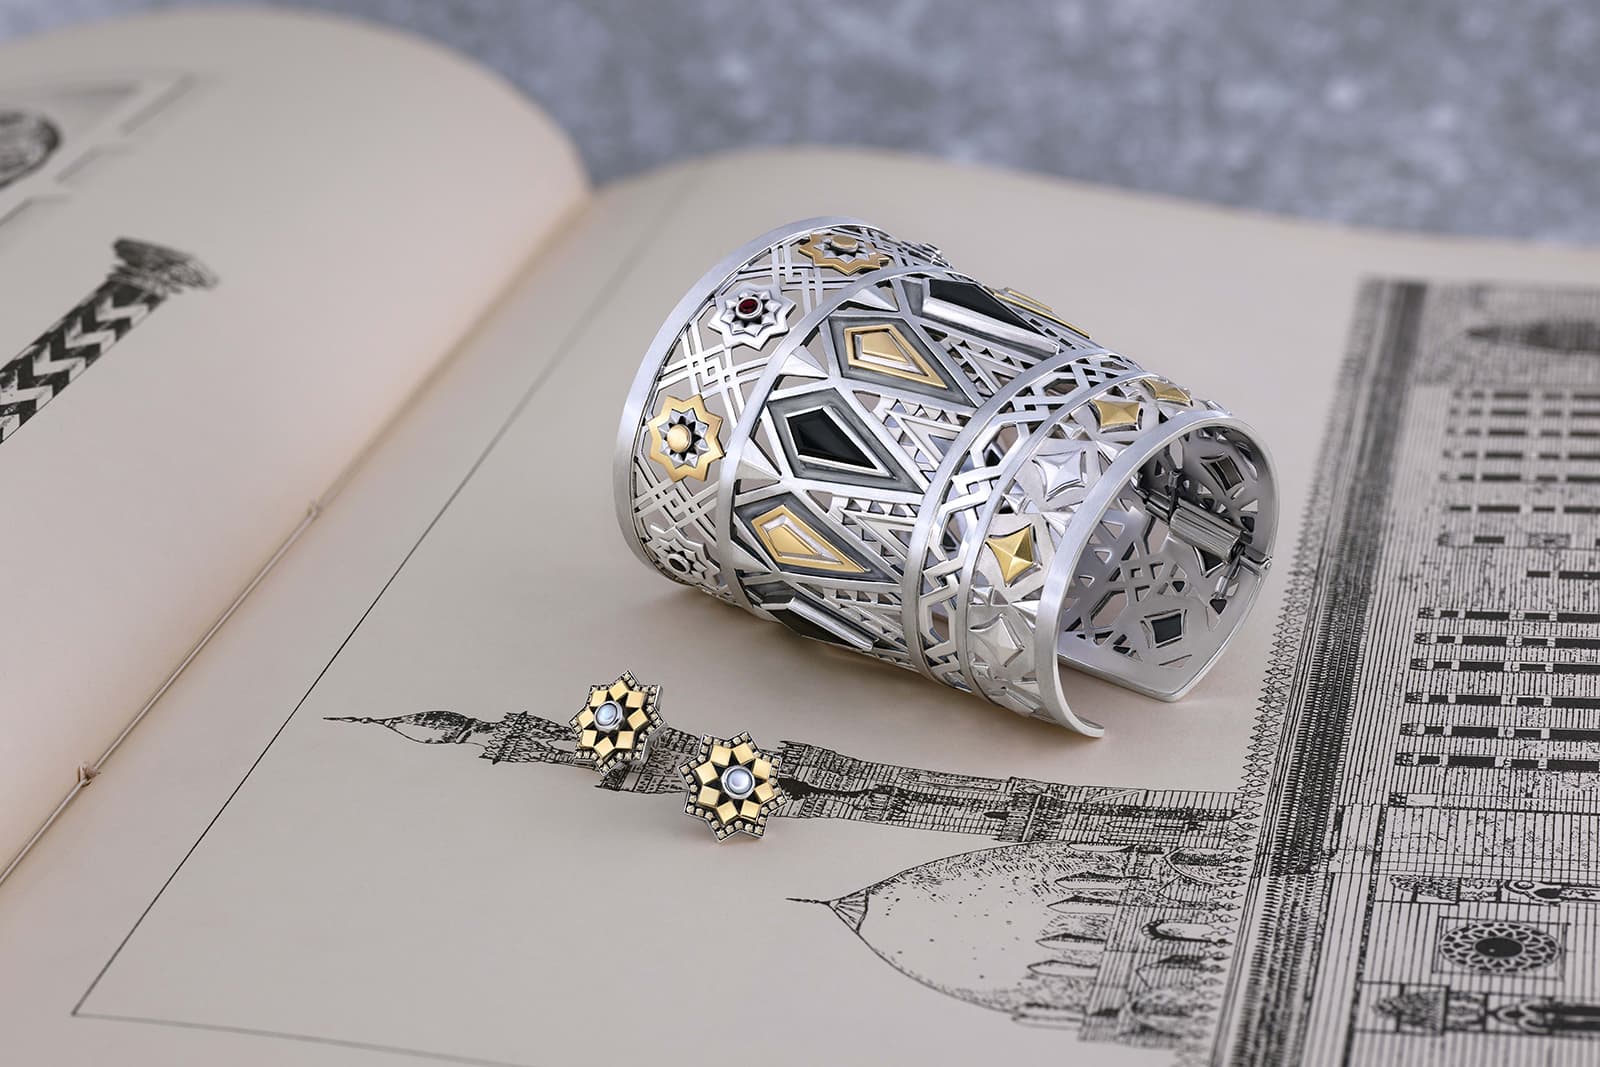 Azza Fahmy 'Mamluk' collection ‘Qalawun’ cuff with onyx and garnet and ‘Qalawun’ earrings with diamonds and pearls, both in yellow gold and sterling silver